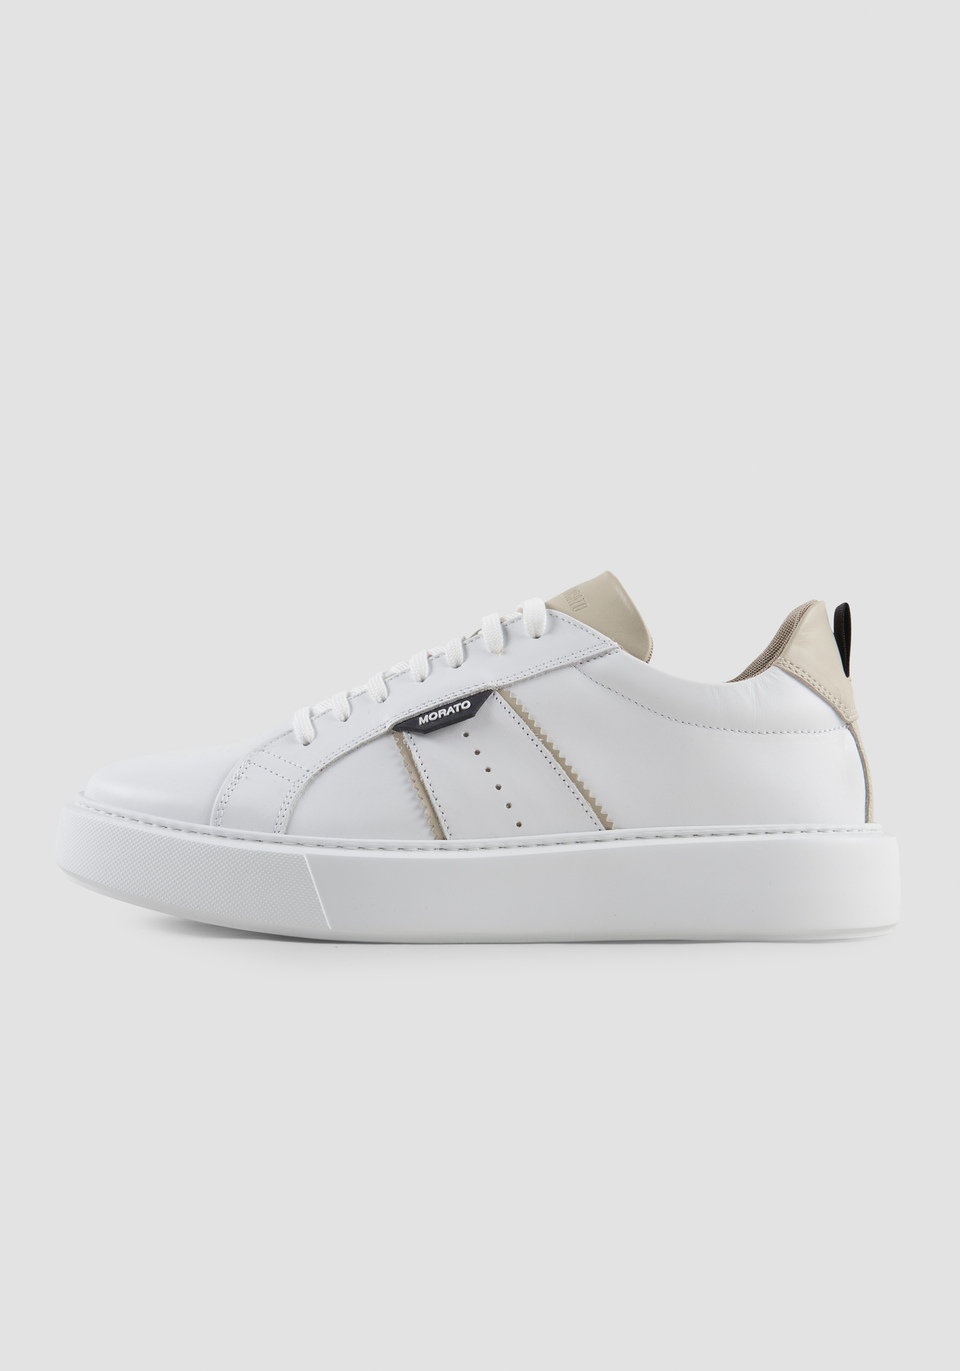 LOW "BYRON GILL" SNEAKER IN 100% LEATHER WITH CONTRASTING DETAILS - Antony Morato Online Shop